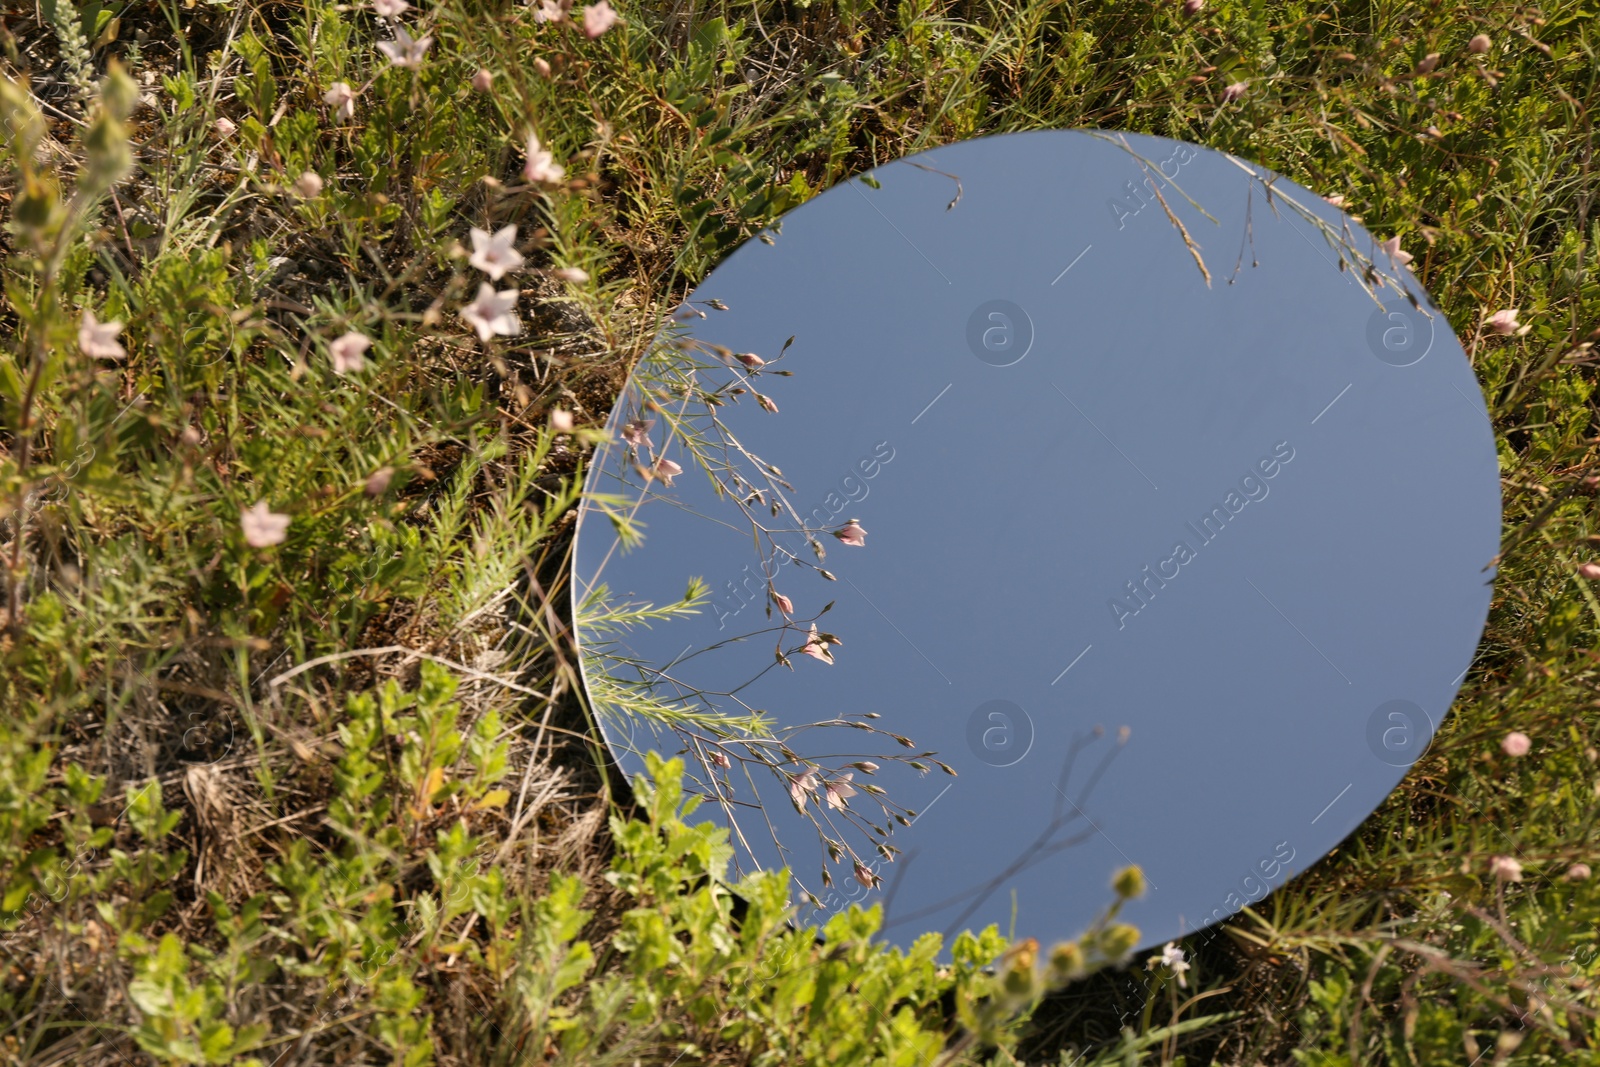 Photo of Spring atmosphere. Round mirror among grass and flowers on sunny day. Space for text